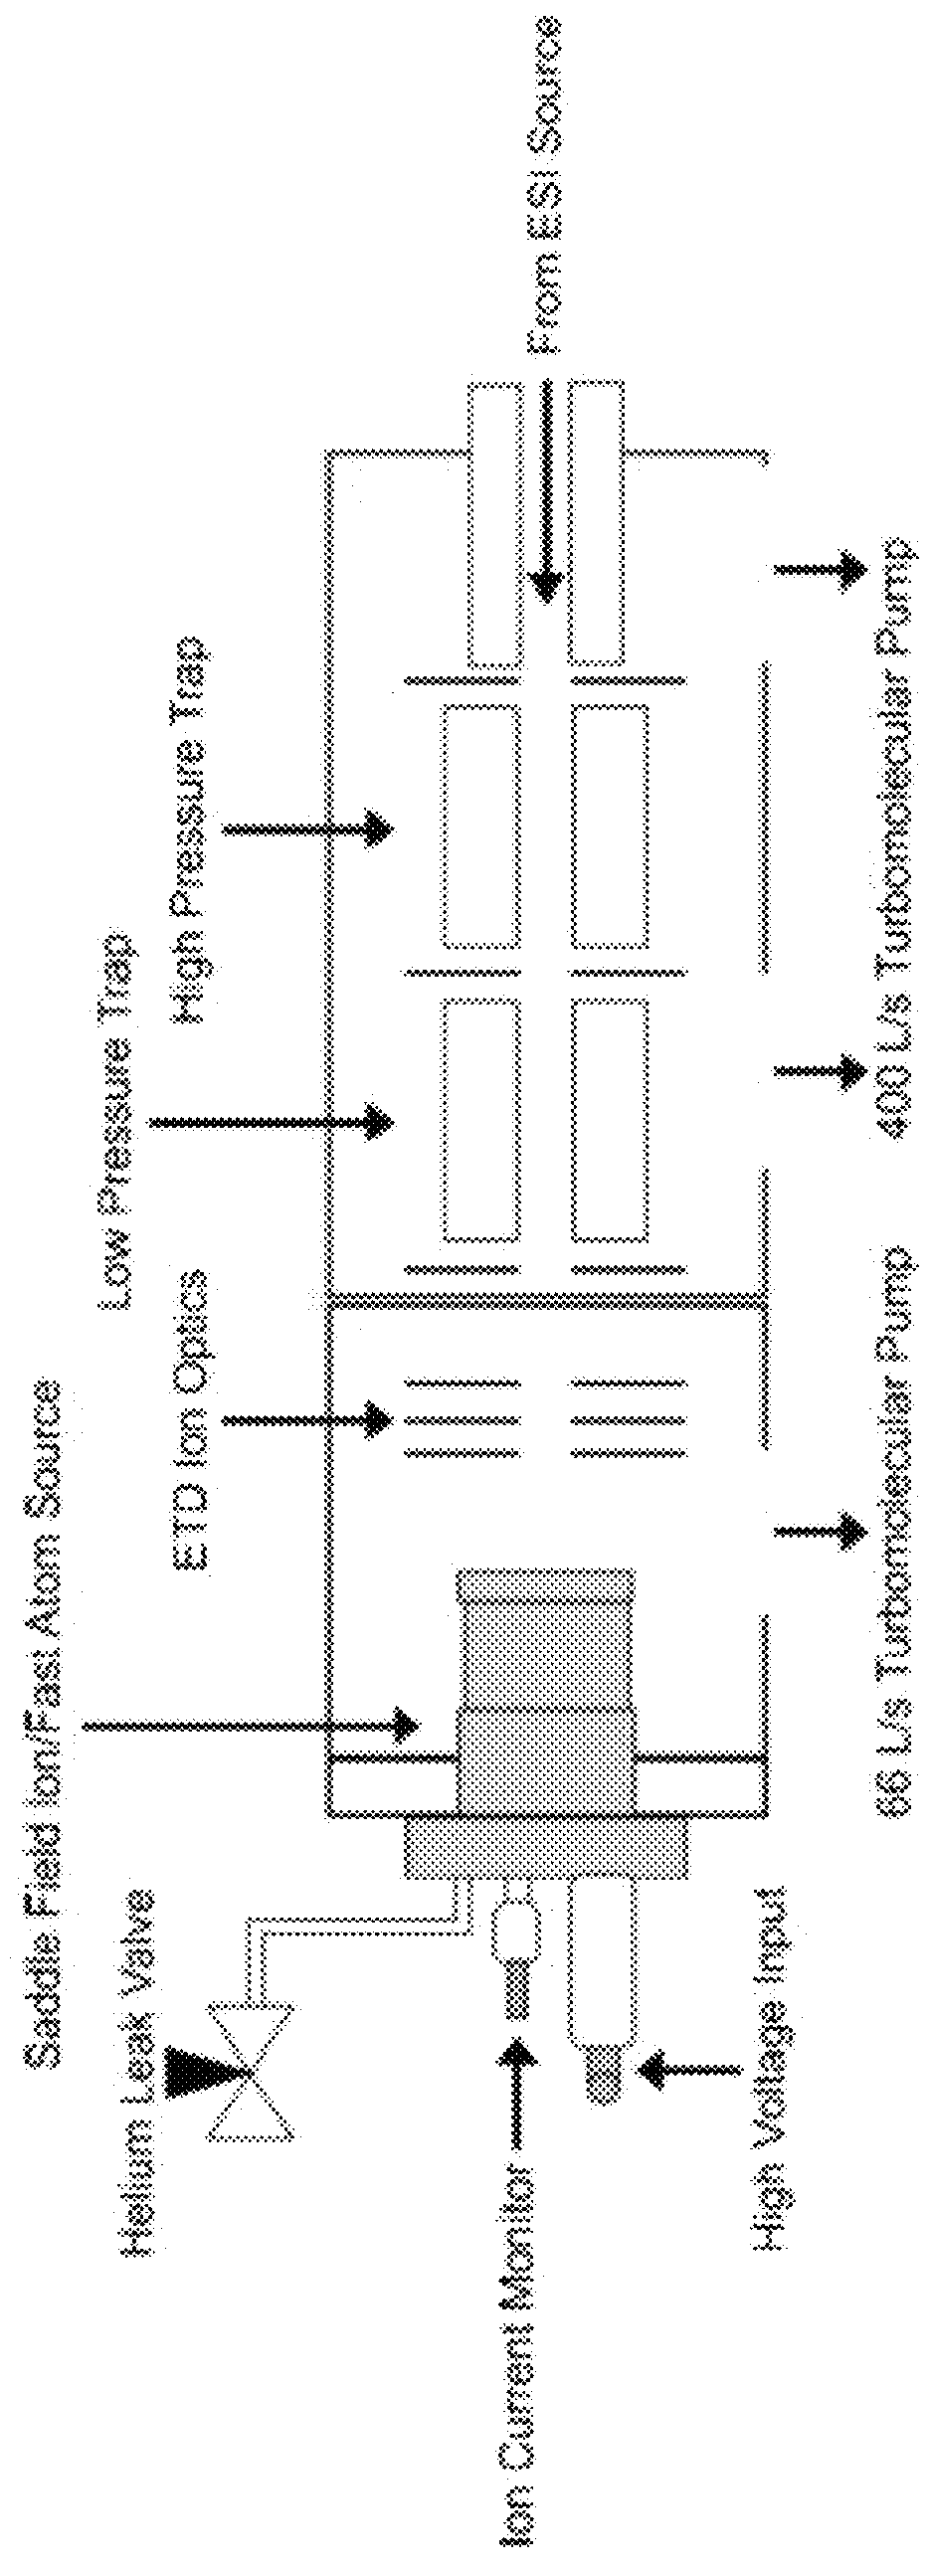 Method and device for mass spectrometric analysis of biomolecules using charge transfer dissociation (CTD)